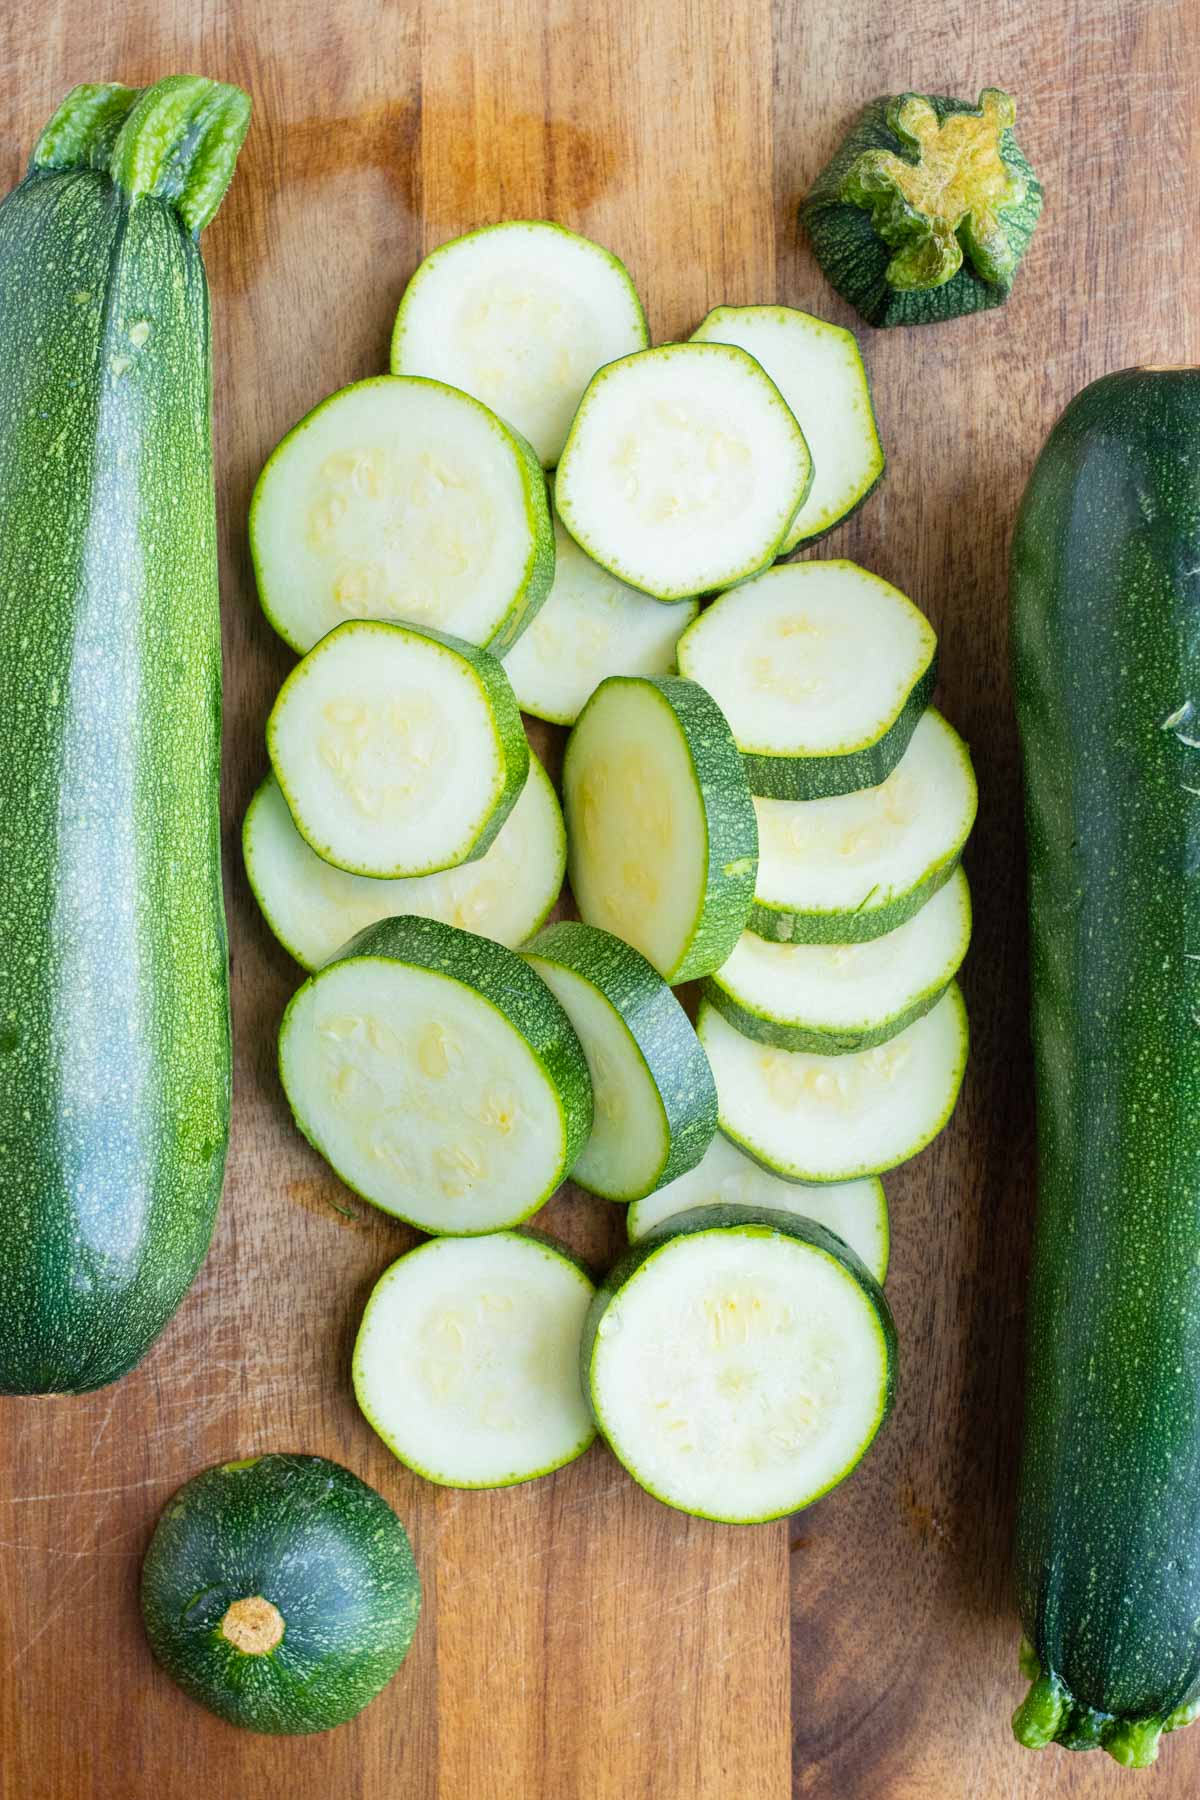 Zucchini is cut into thick slices on a cutting board with whole zucchinis next to them as preparation to freeze zucchini.